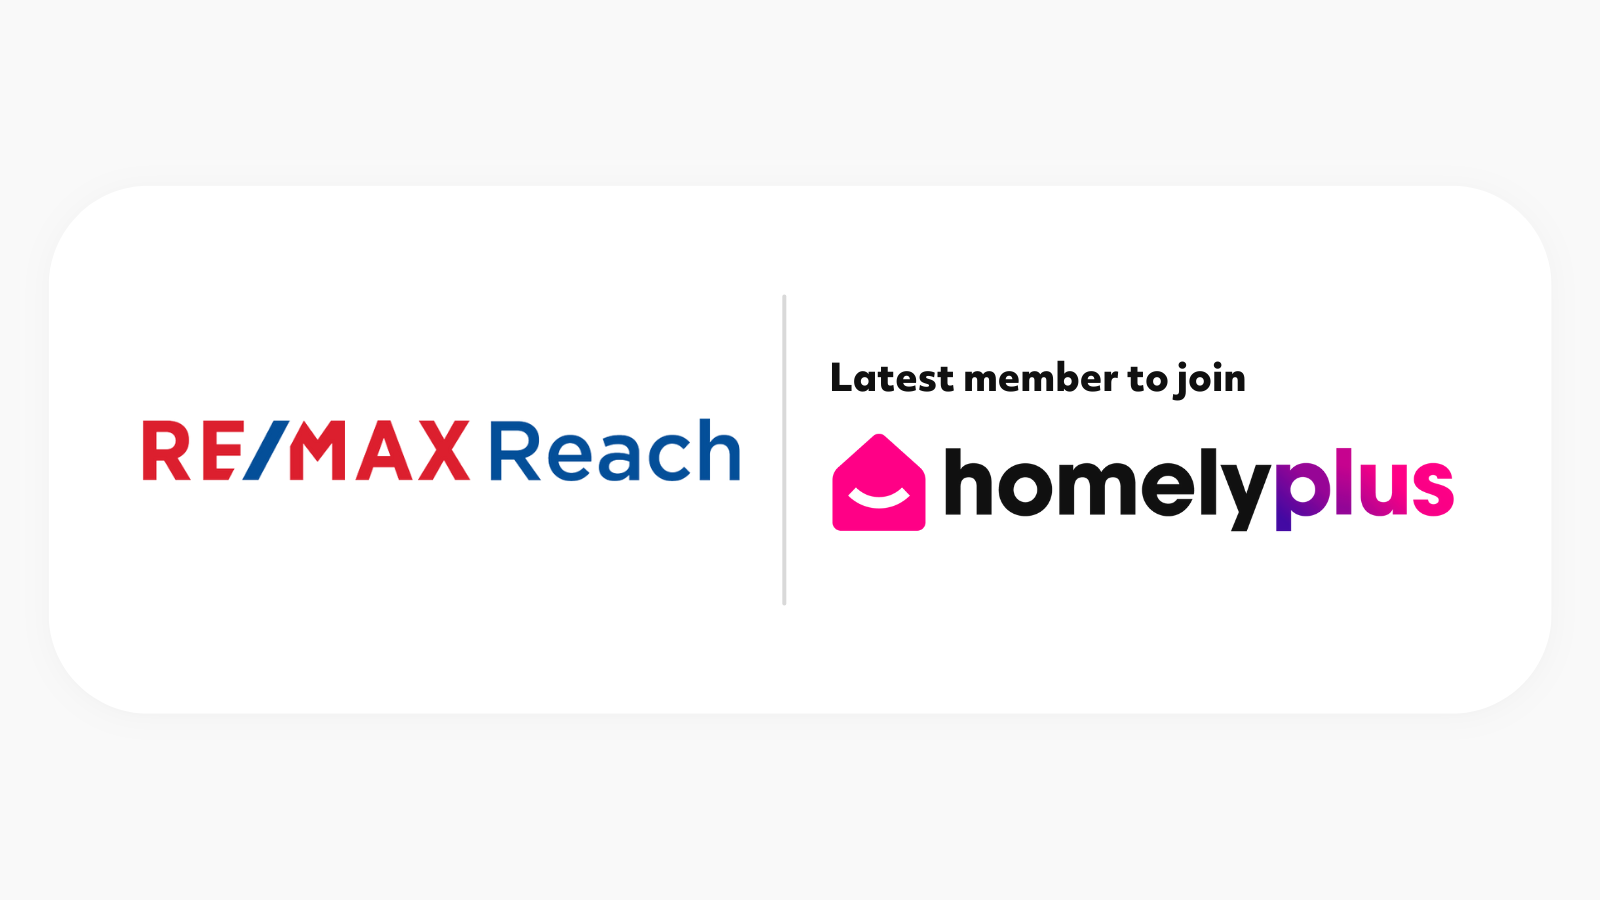 RE/MAX Reach joins Homely plus